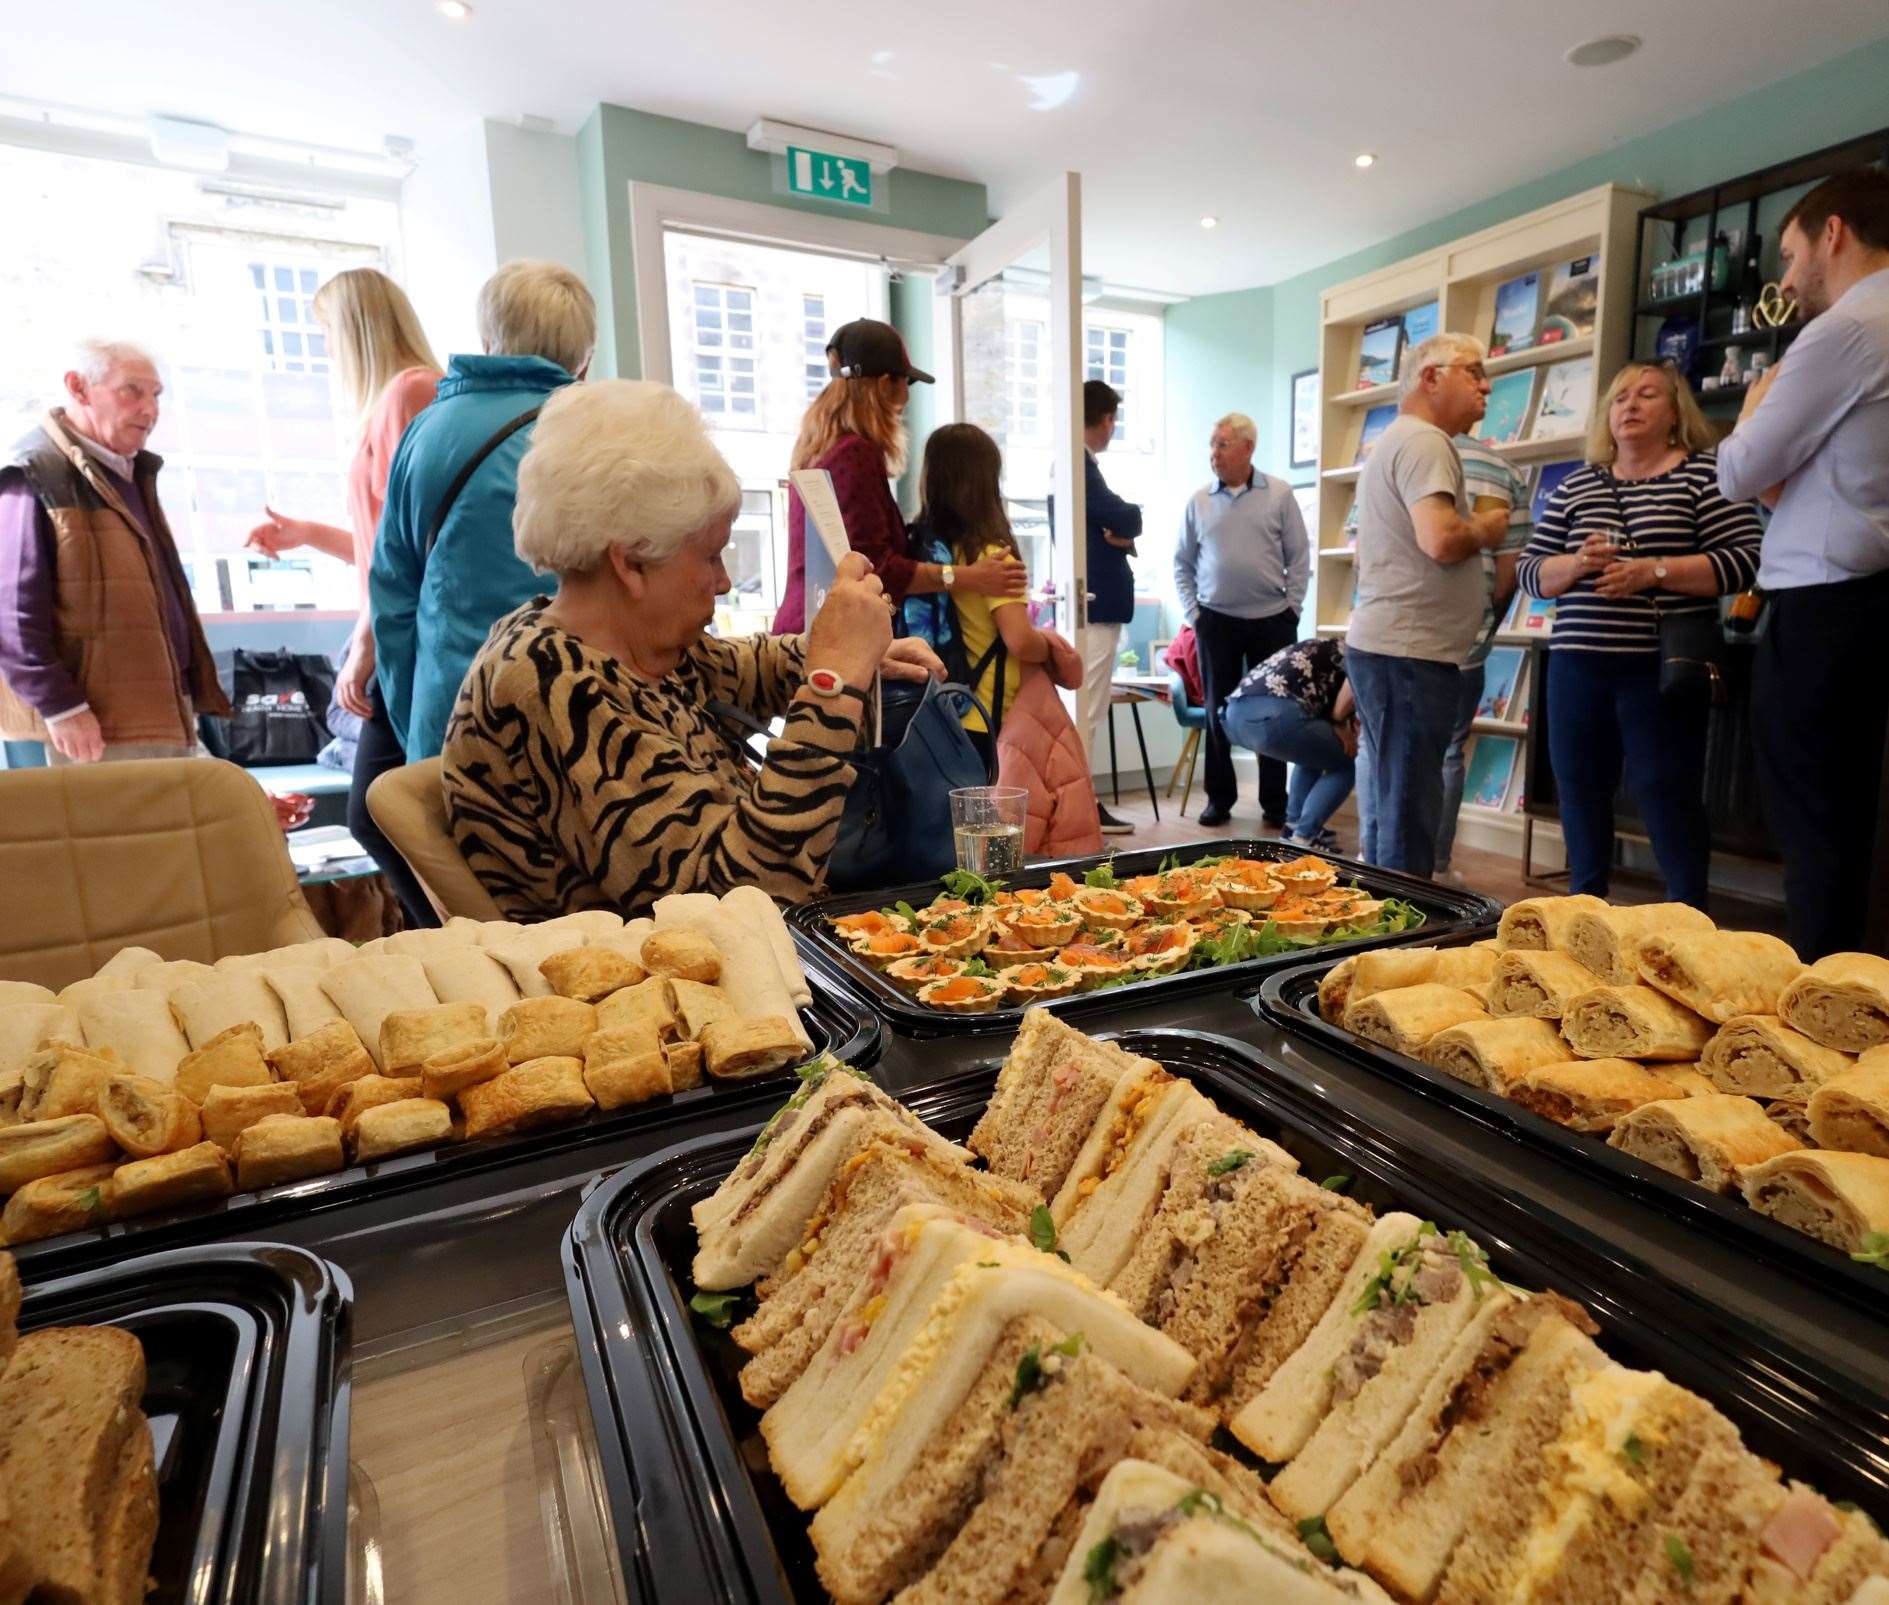 There was plenty of food laid out for everyone who attended. Picture: James Mackenzie.